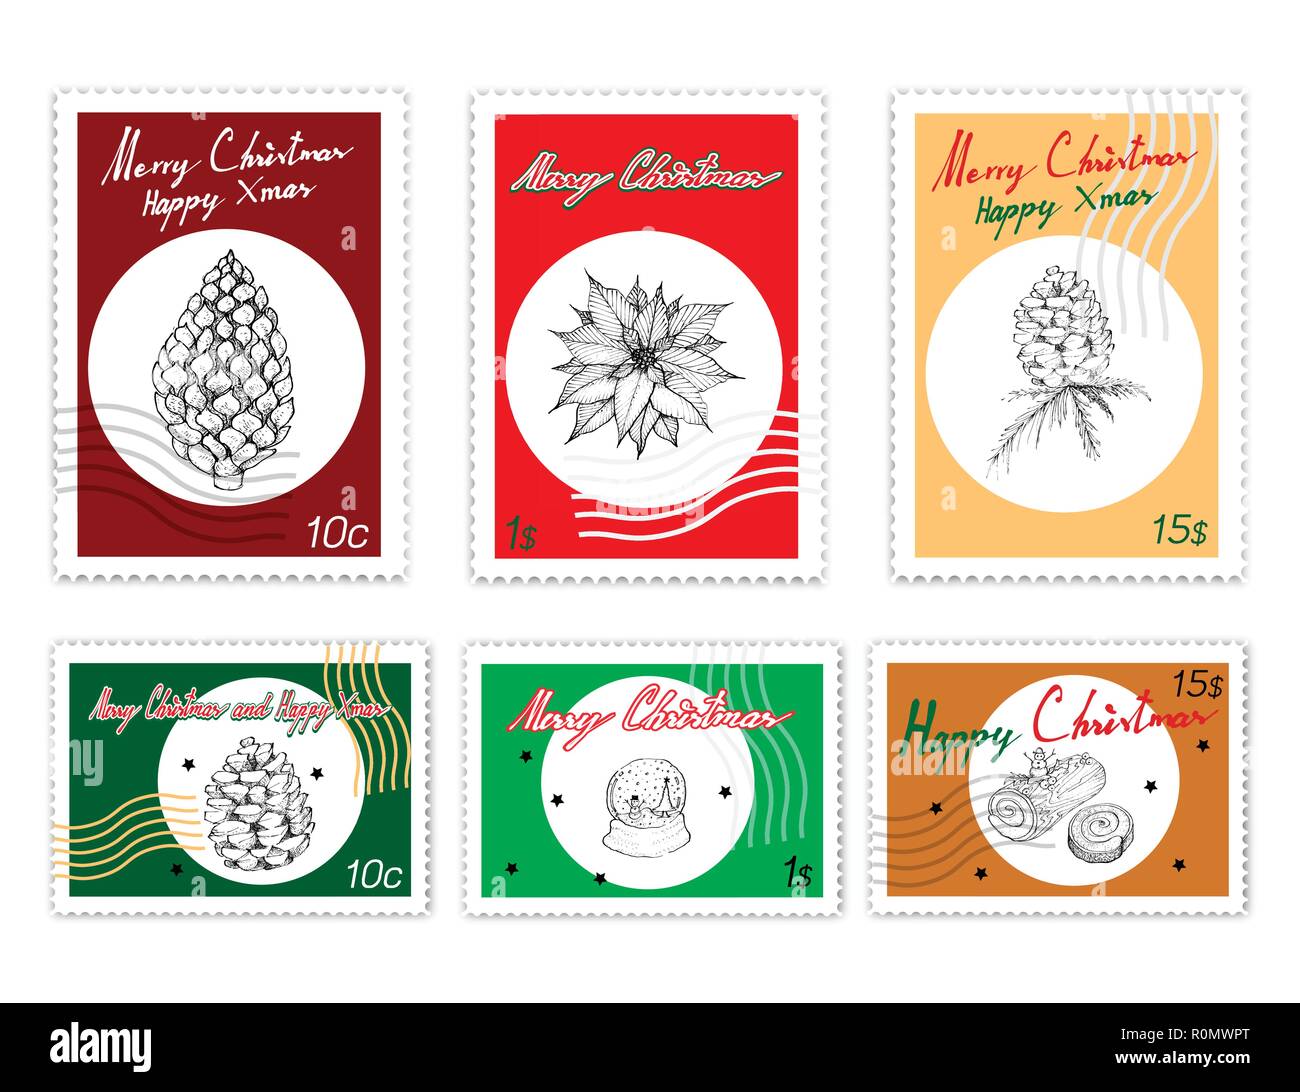 Merry Xmas, Post Stamps Set of Illustration Hand Drawn Sketch of Various Style of Snow Globe, Yule Log Cakes, Poinsettia Plant and Pine Corn. Sigh for Stock Vector